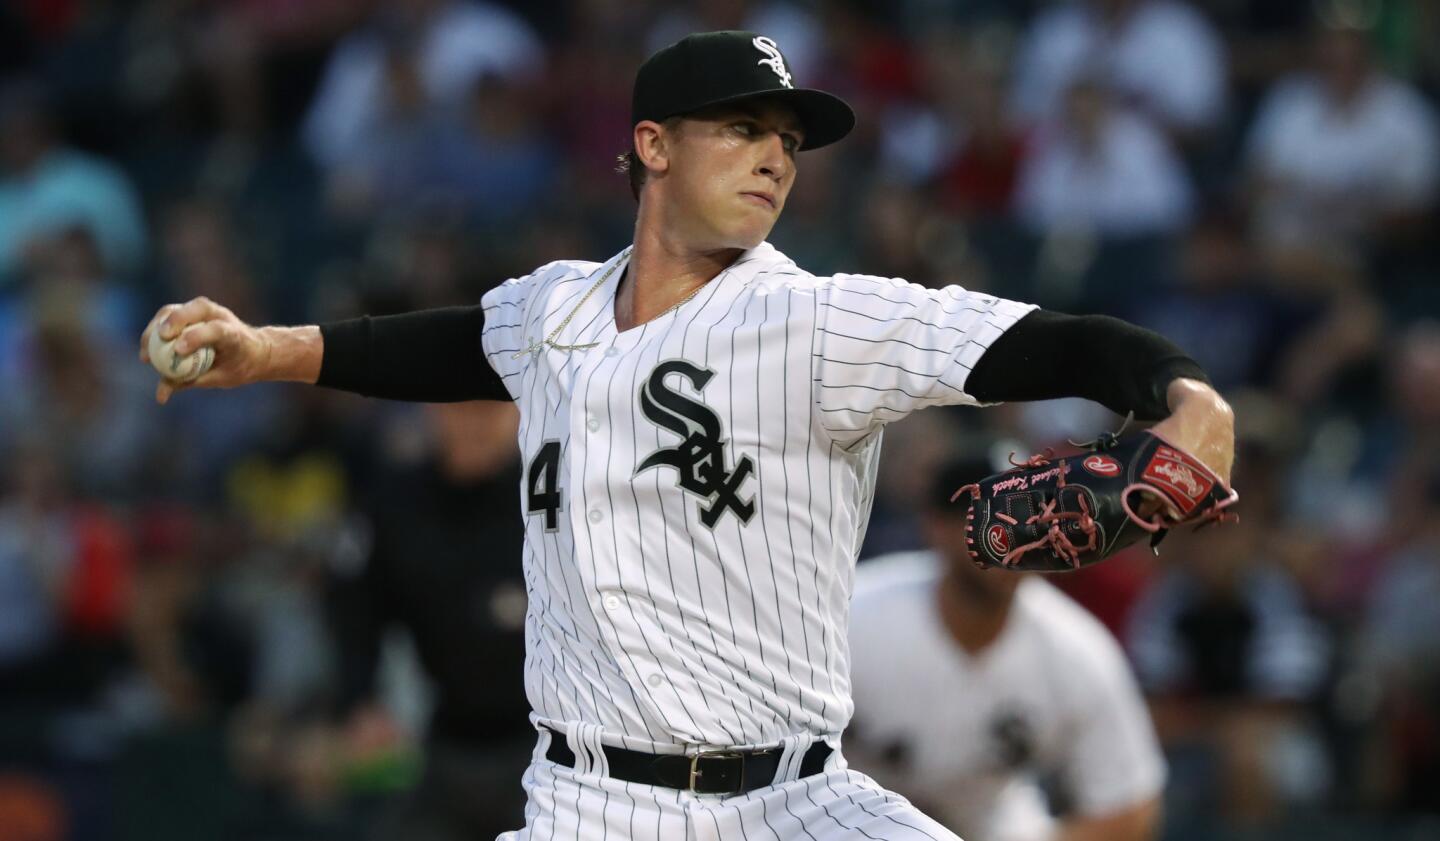 White Sox starting pitcher Michael Kopech throws against the Red Sox in the first inning at Guaranteed Rate Field on Aug. 31, 2018.